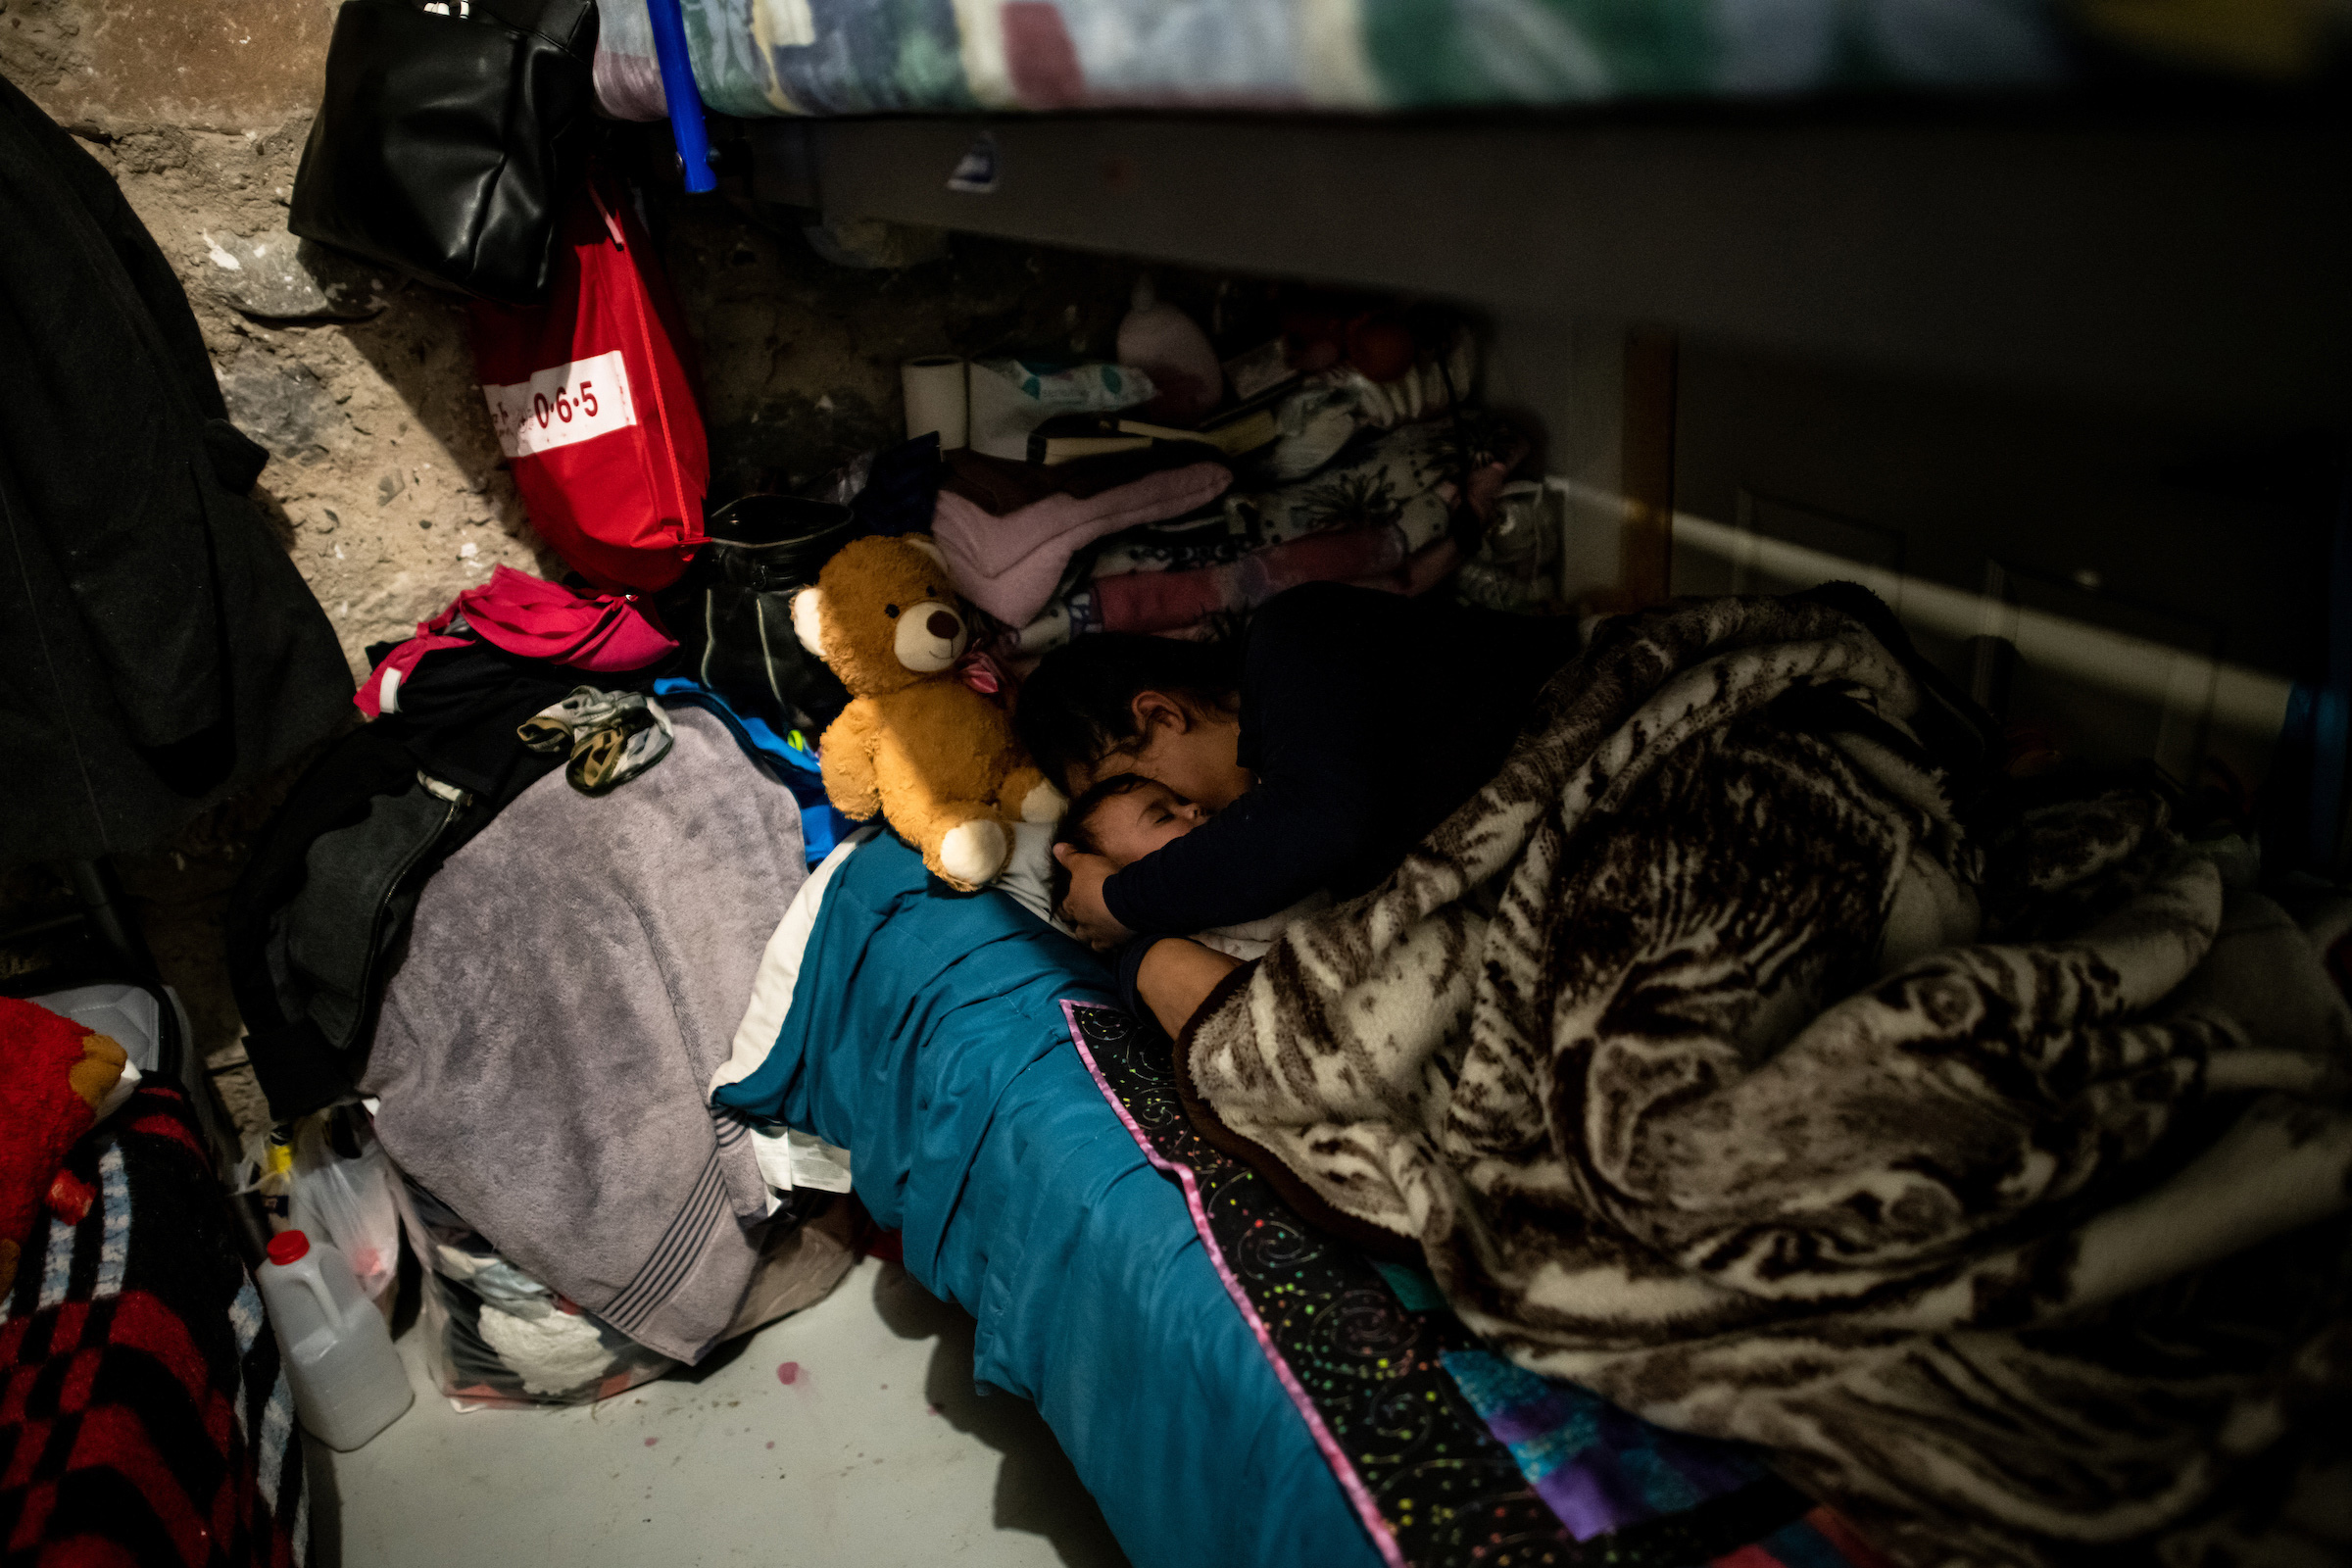 Xiomara lays down with her baby in one of the dormitories. (Meridith Kohut for TIME)